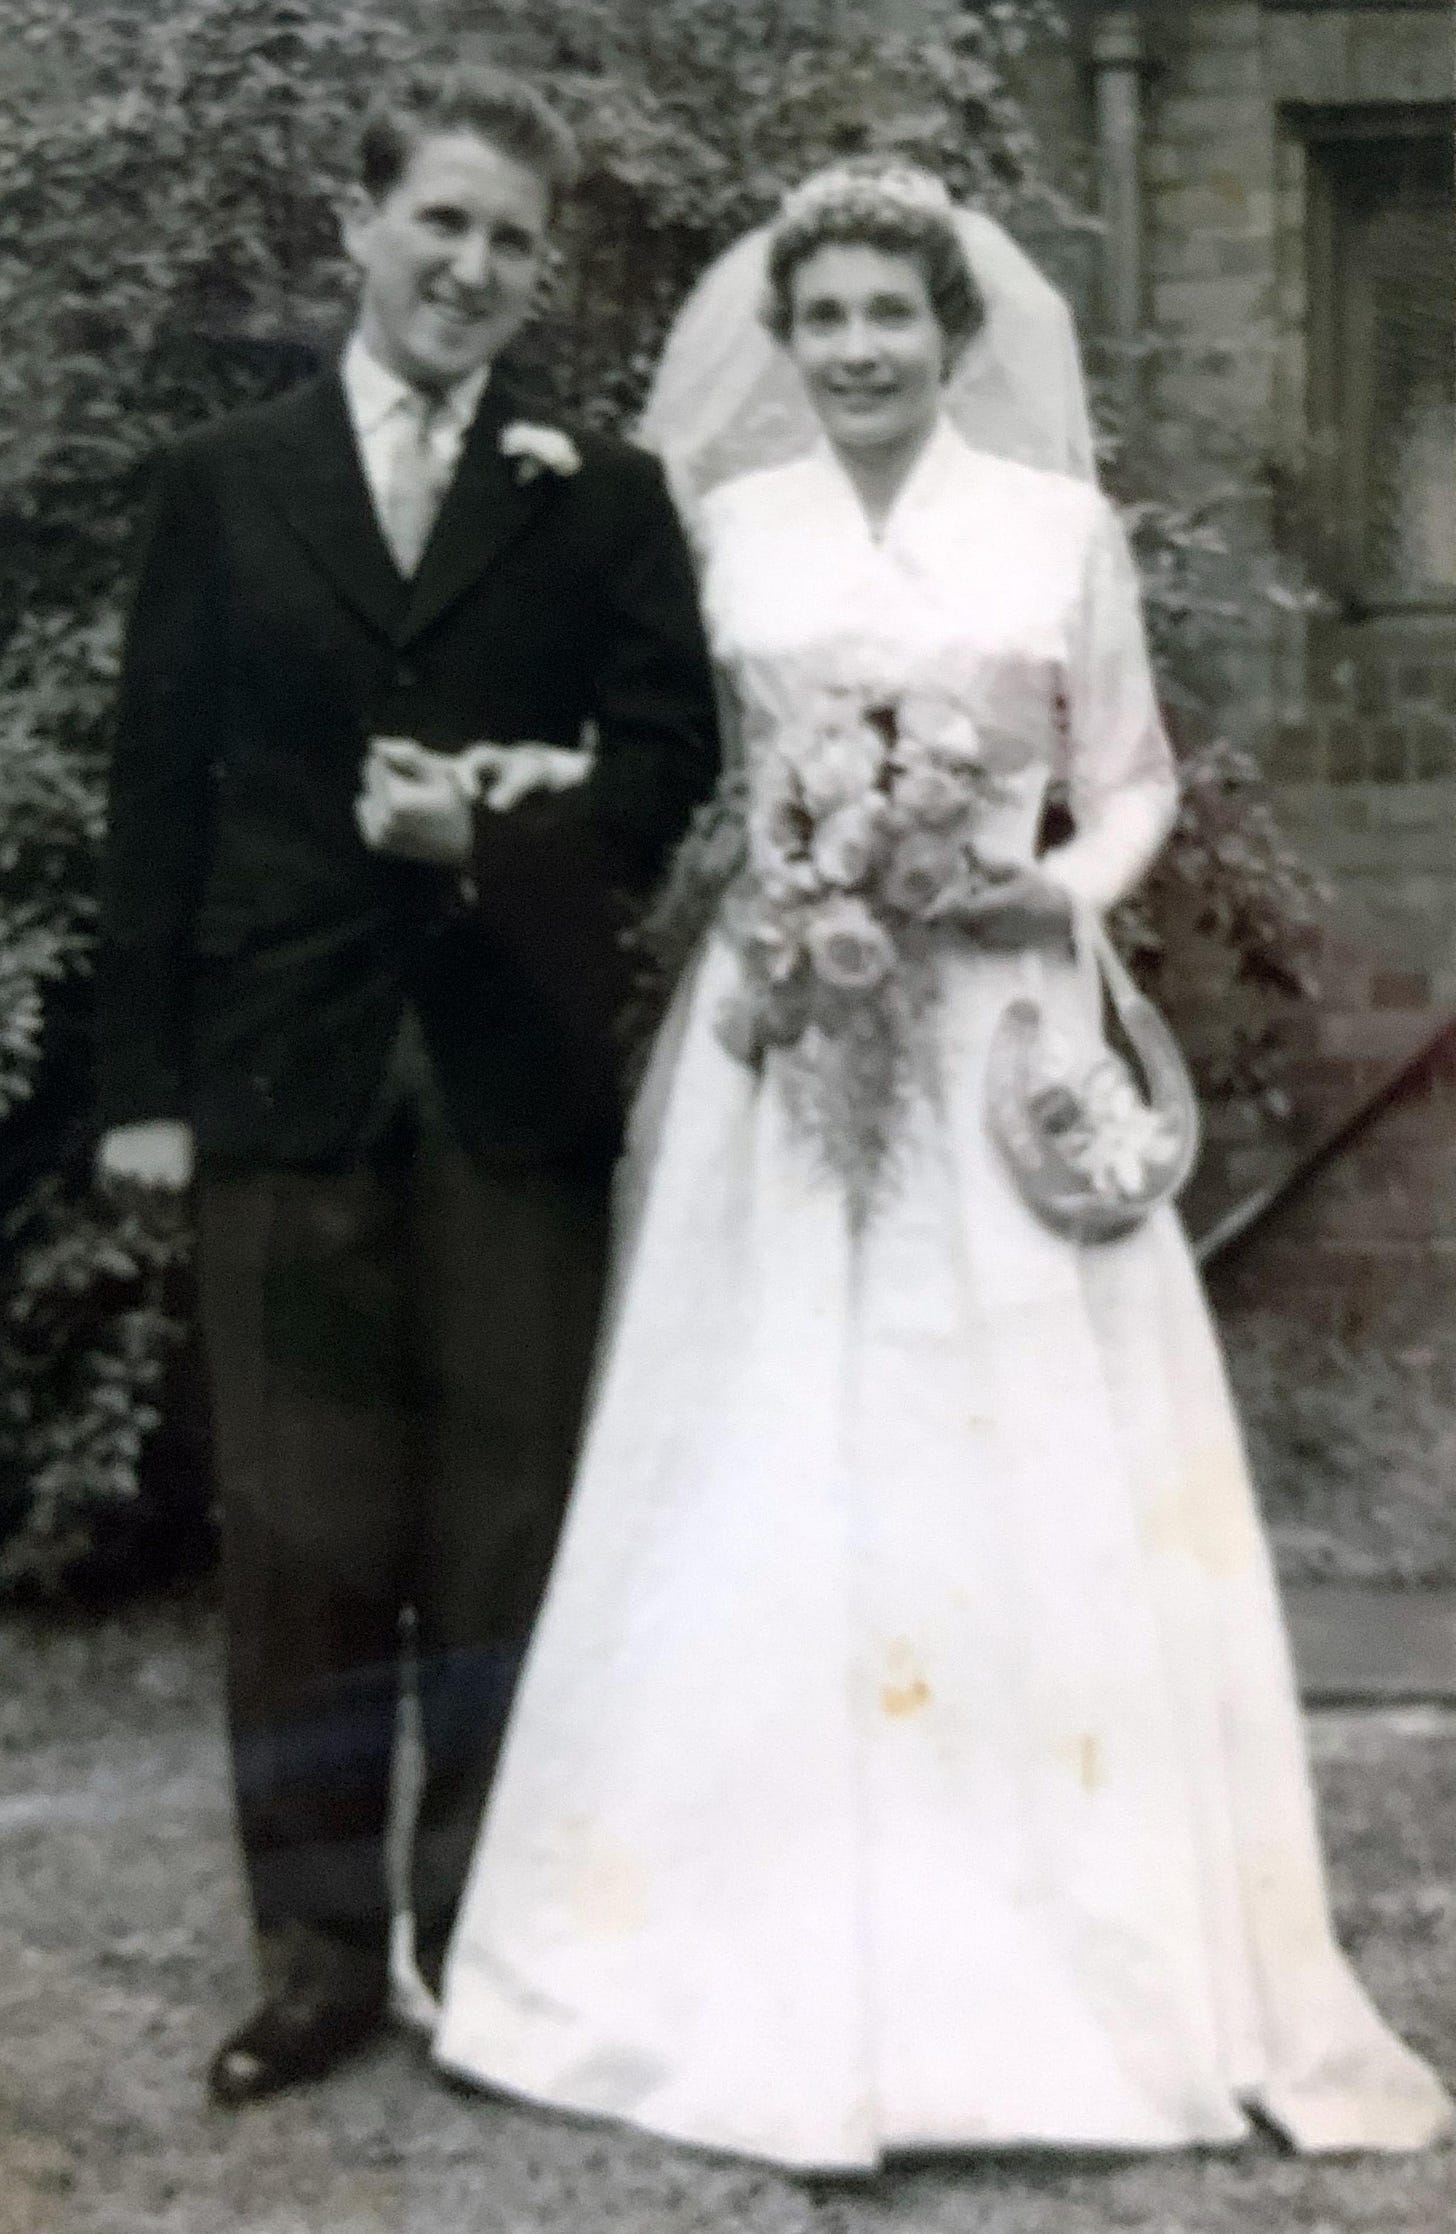 A photo of my grandparents smiling on their wedding day. My grandad in a black suit with a white flower in his button hole. My gradnma in white holding a bunch of flowers and a veil in her hair. 